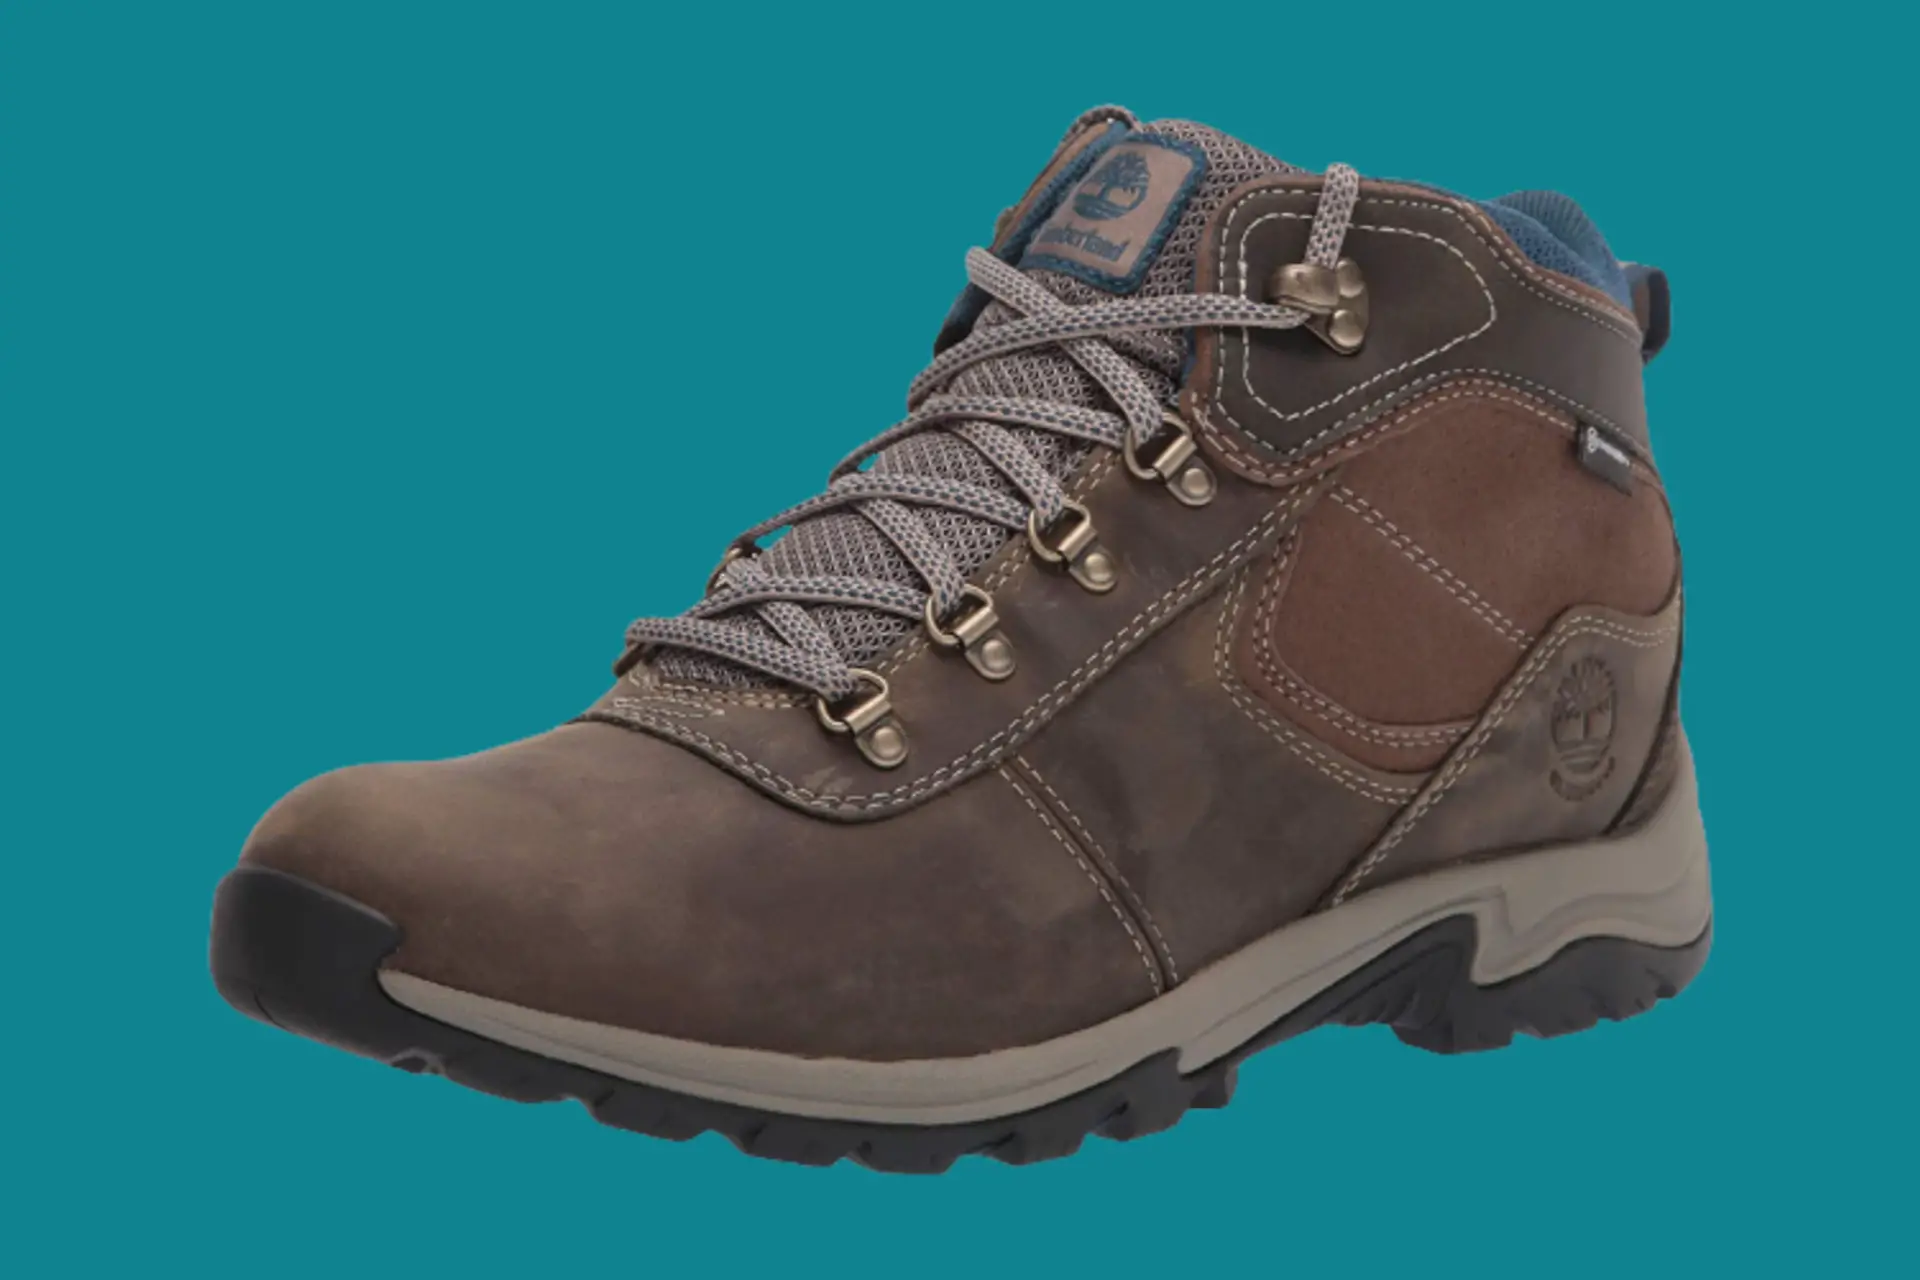 Comfy Timberland boots for hikers